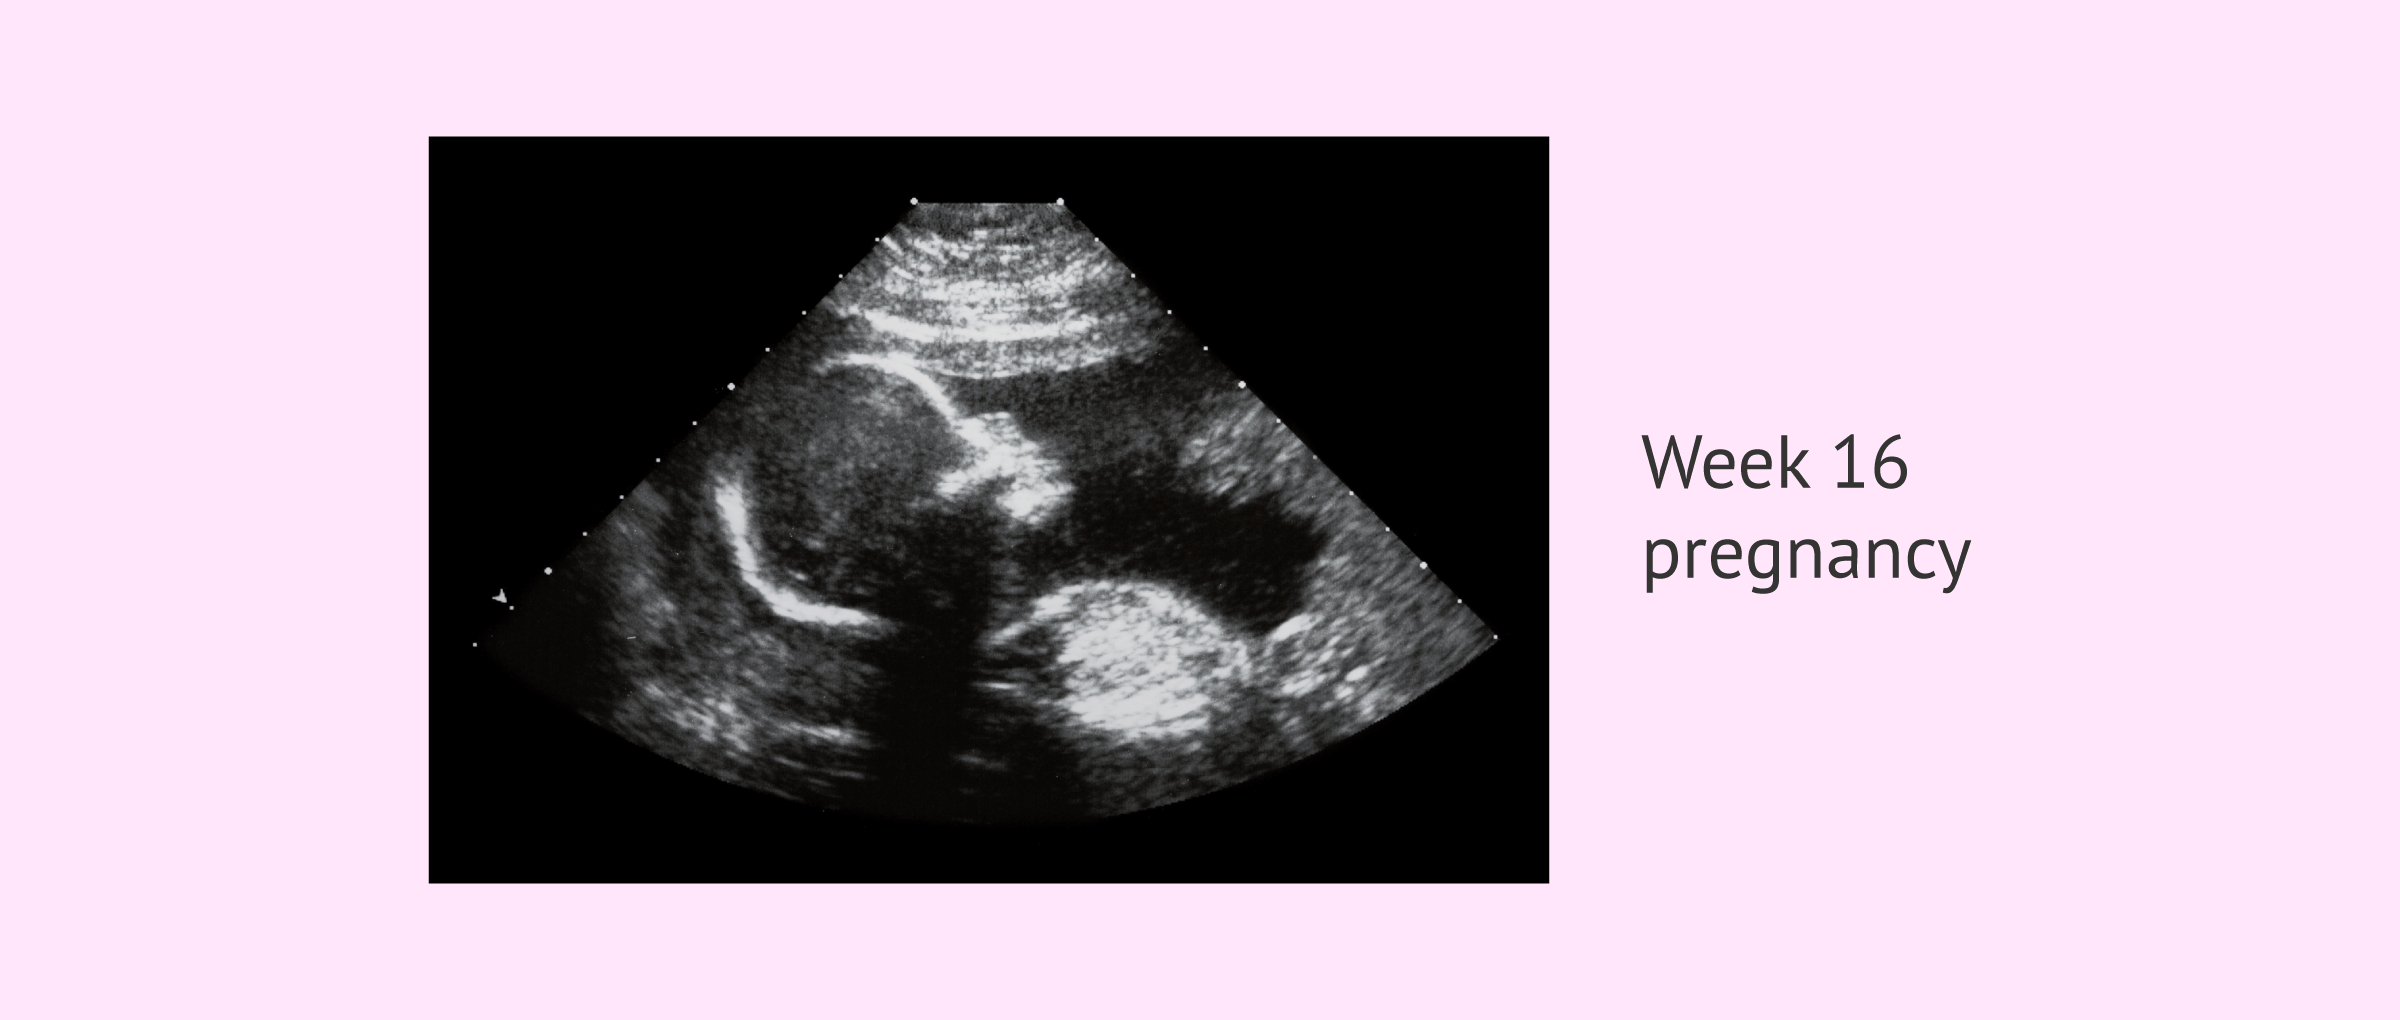 Ultrasound scan in the 16th week of pregnancy